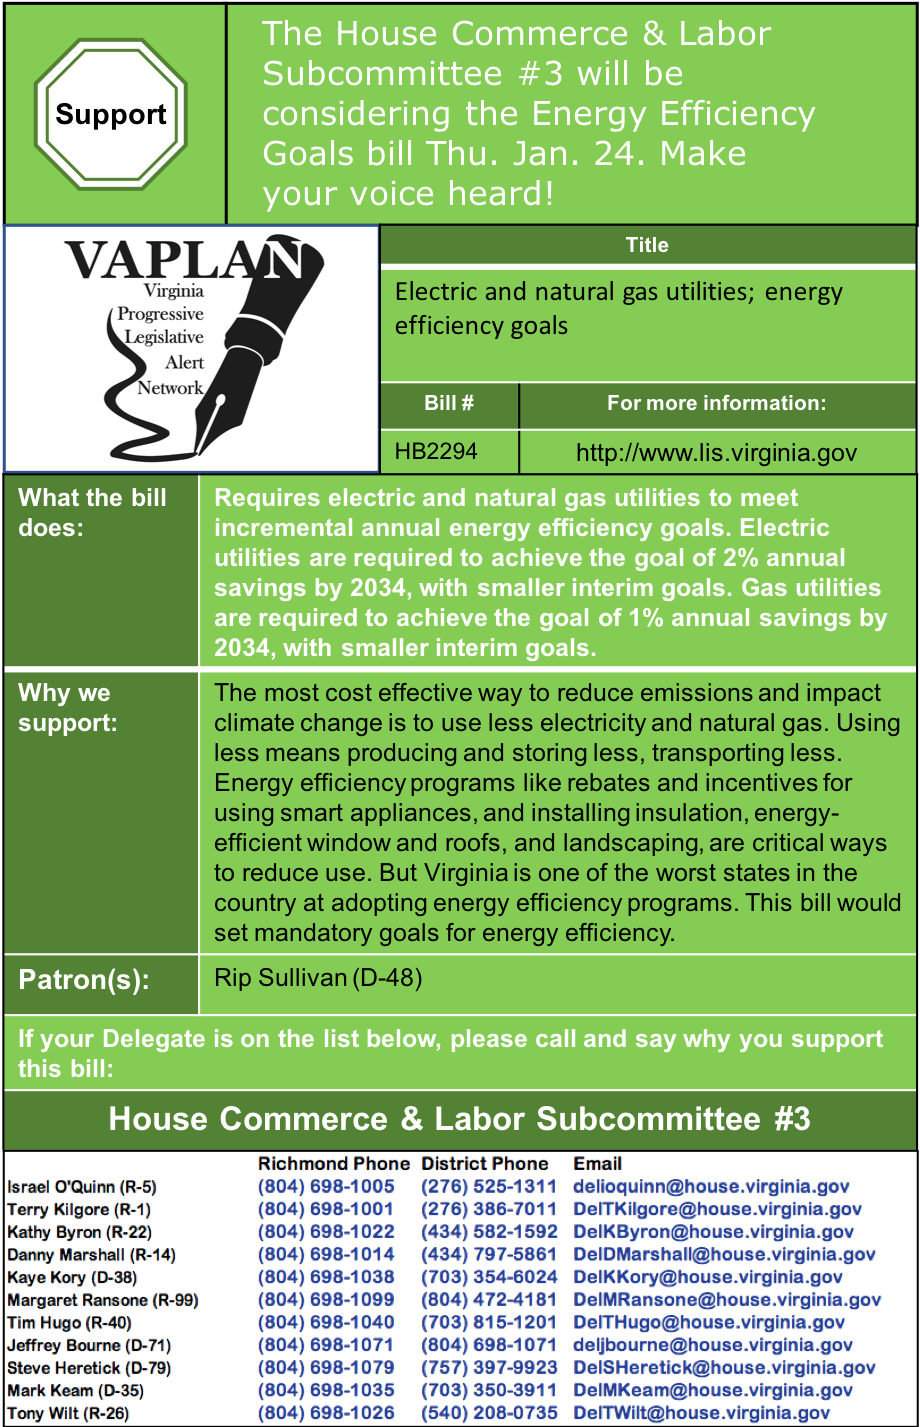 ALERT: Energy Efficiency Goals to be heard in House Commerce & Labor Subcommittee #3 Thu. Jan. 24